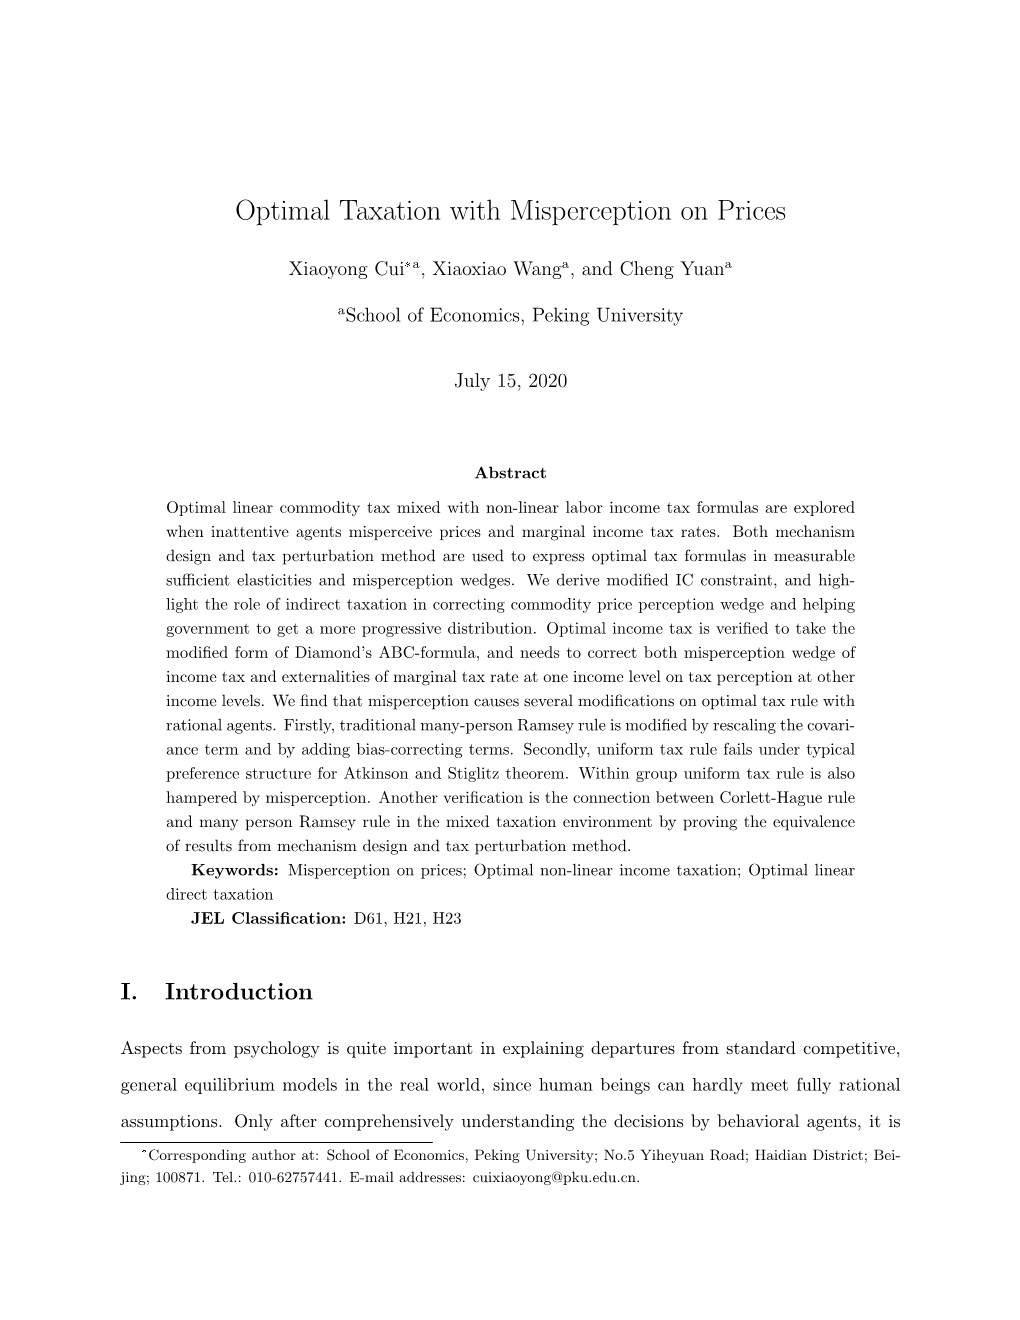 Optimal Taxation with Misperception on Prices